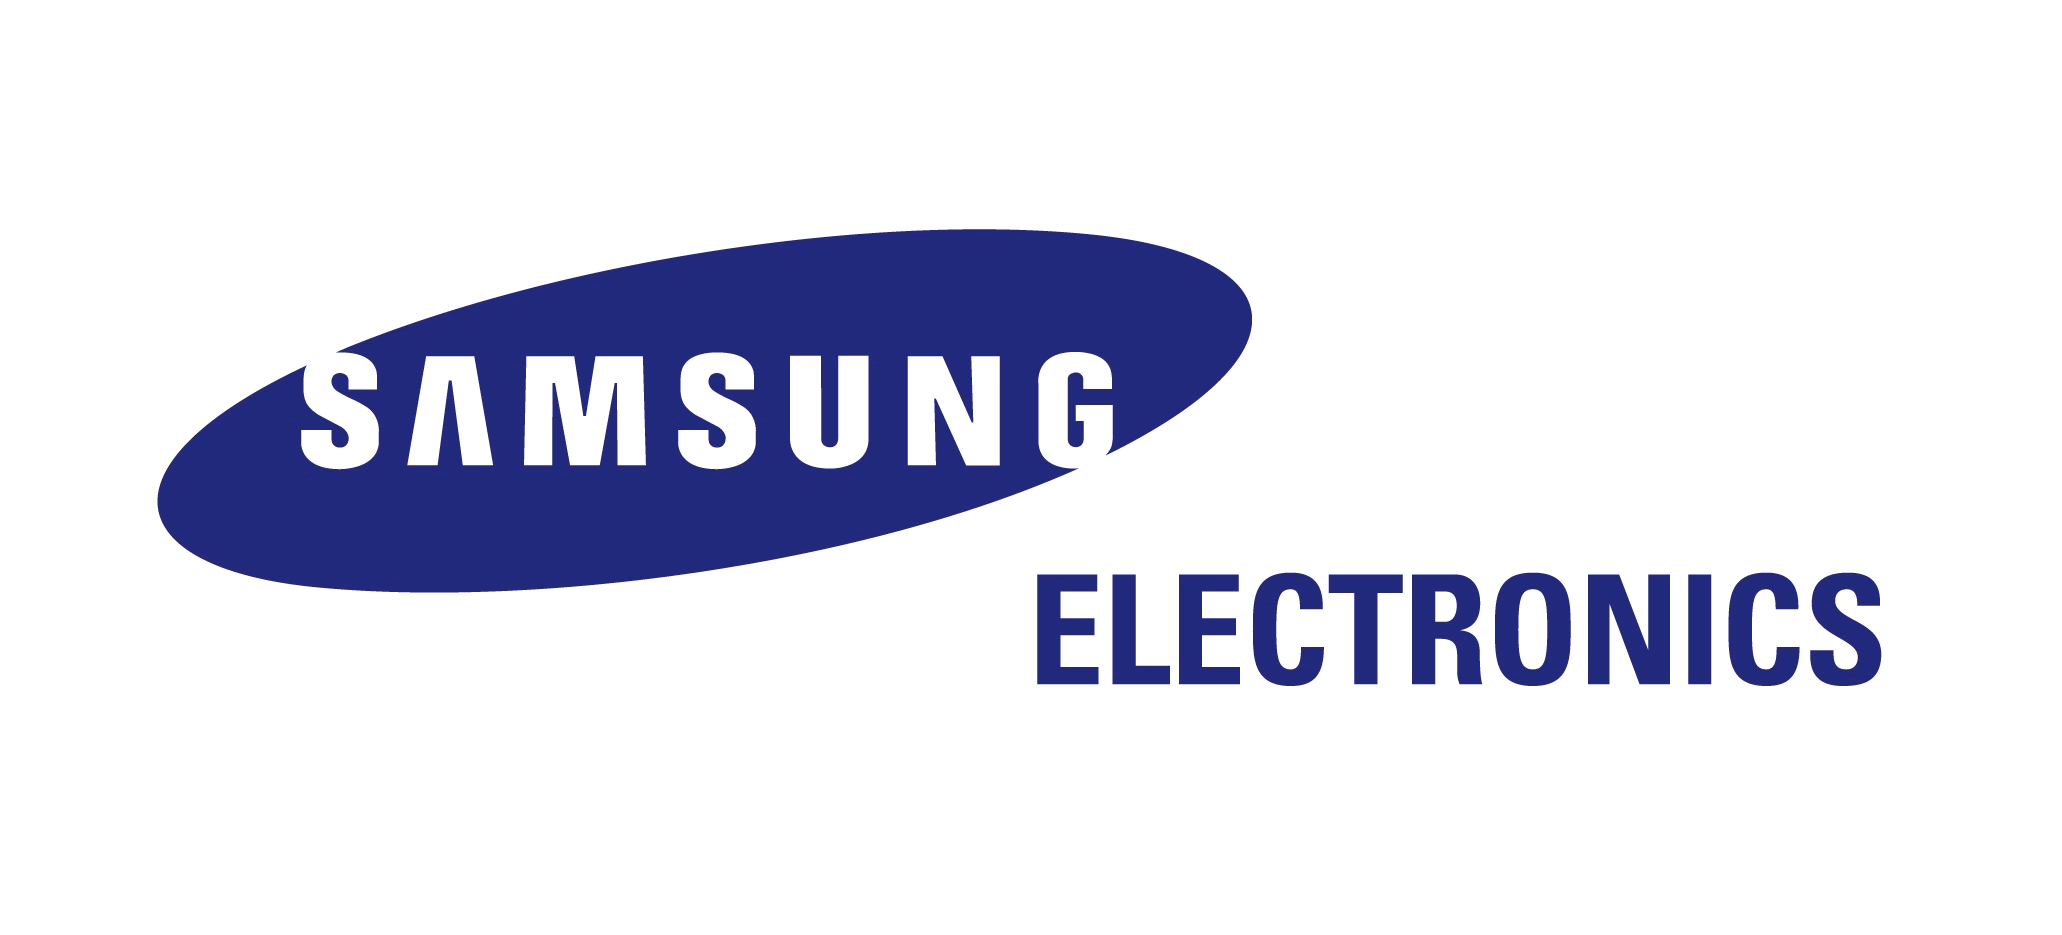 South Korean Electronics Logo - USA > South Korean Samsung to Acquire Harman for approximately $8